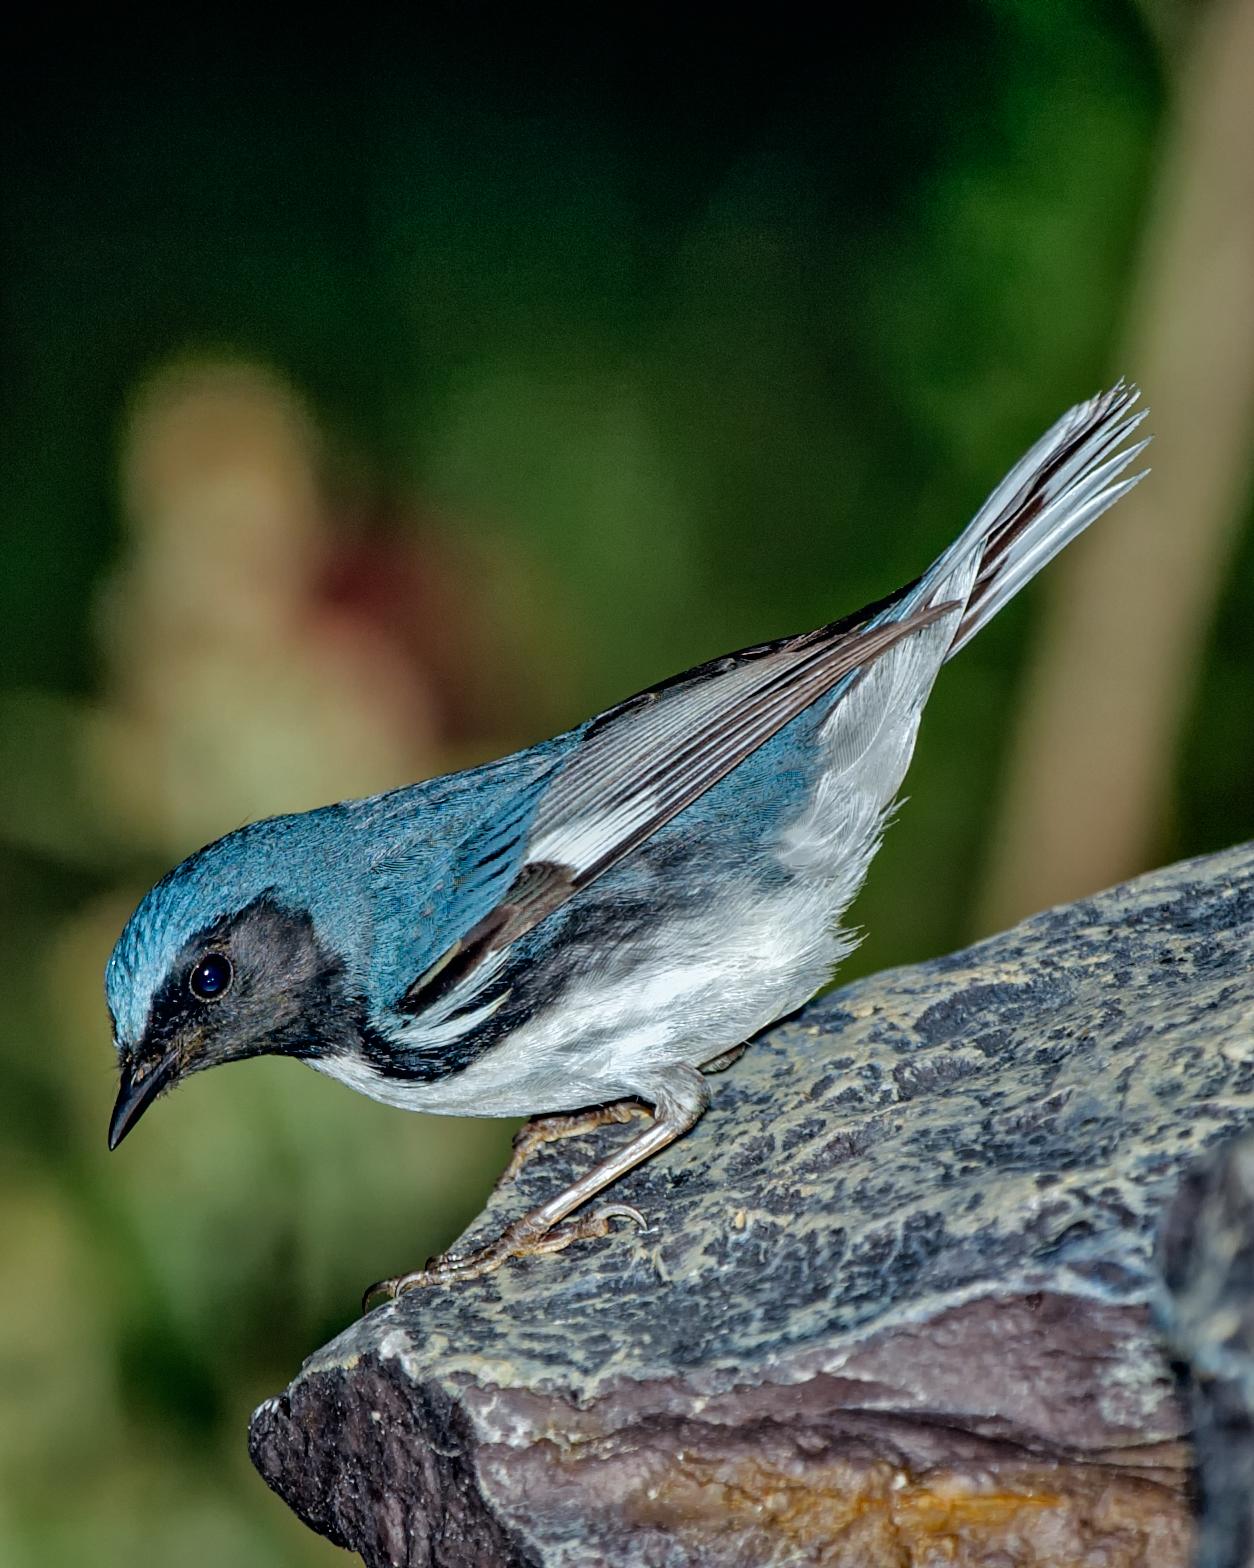 Black-throated Blue Warbler Photo by JC Knoll